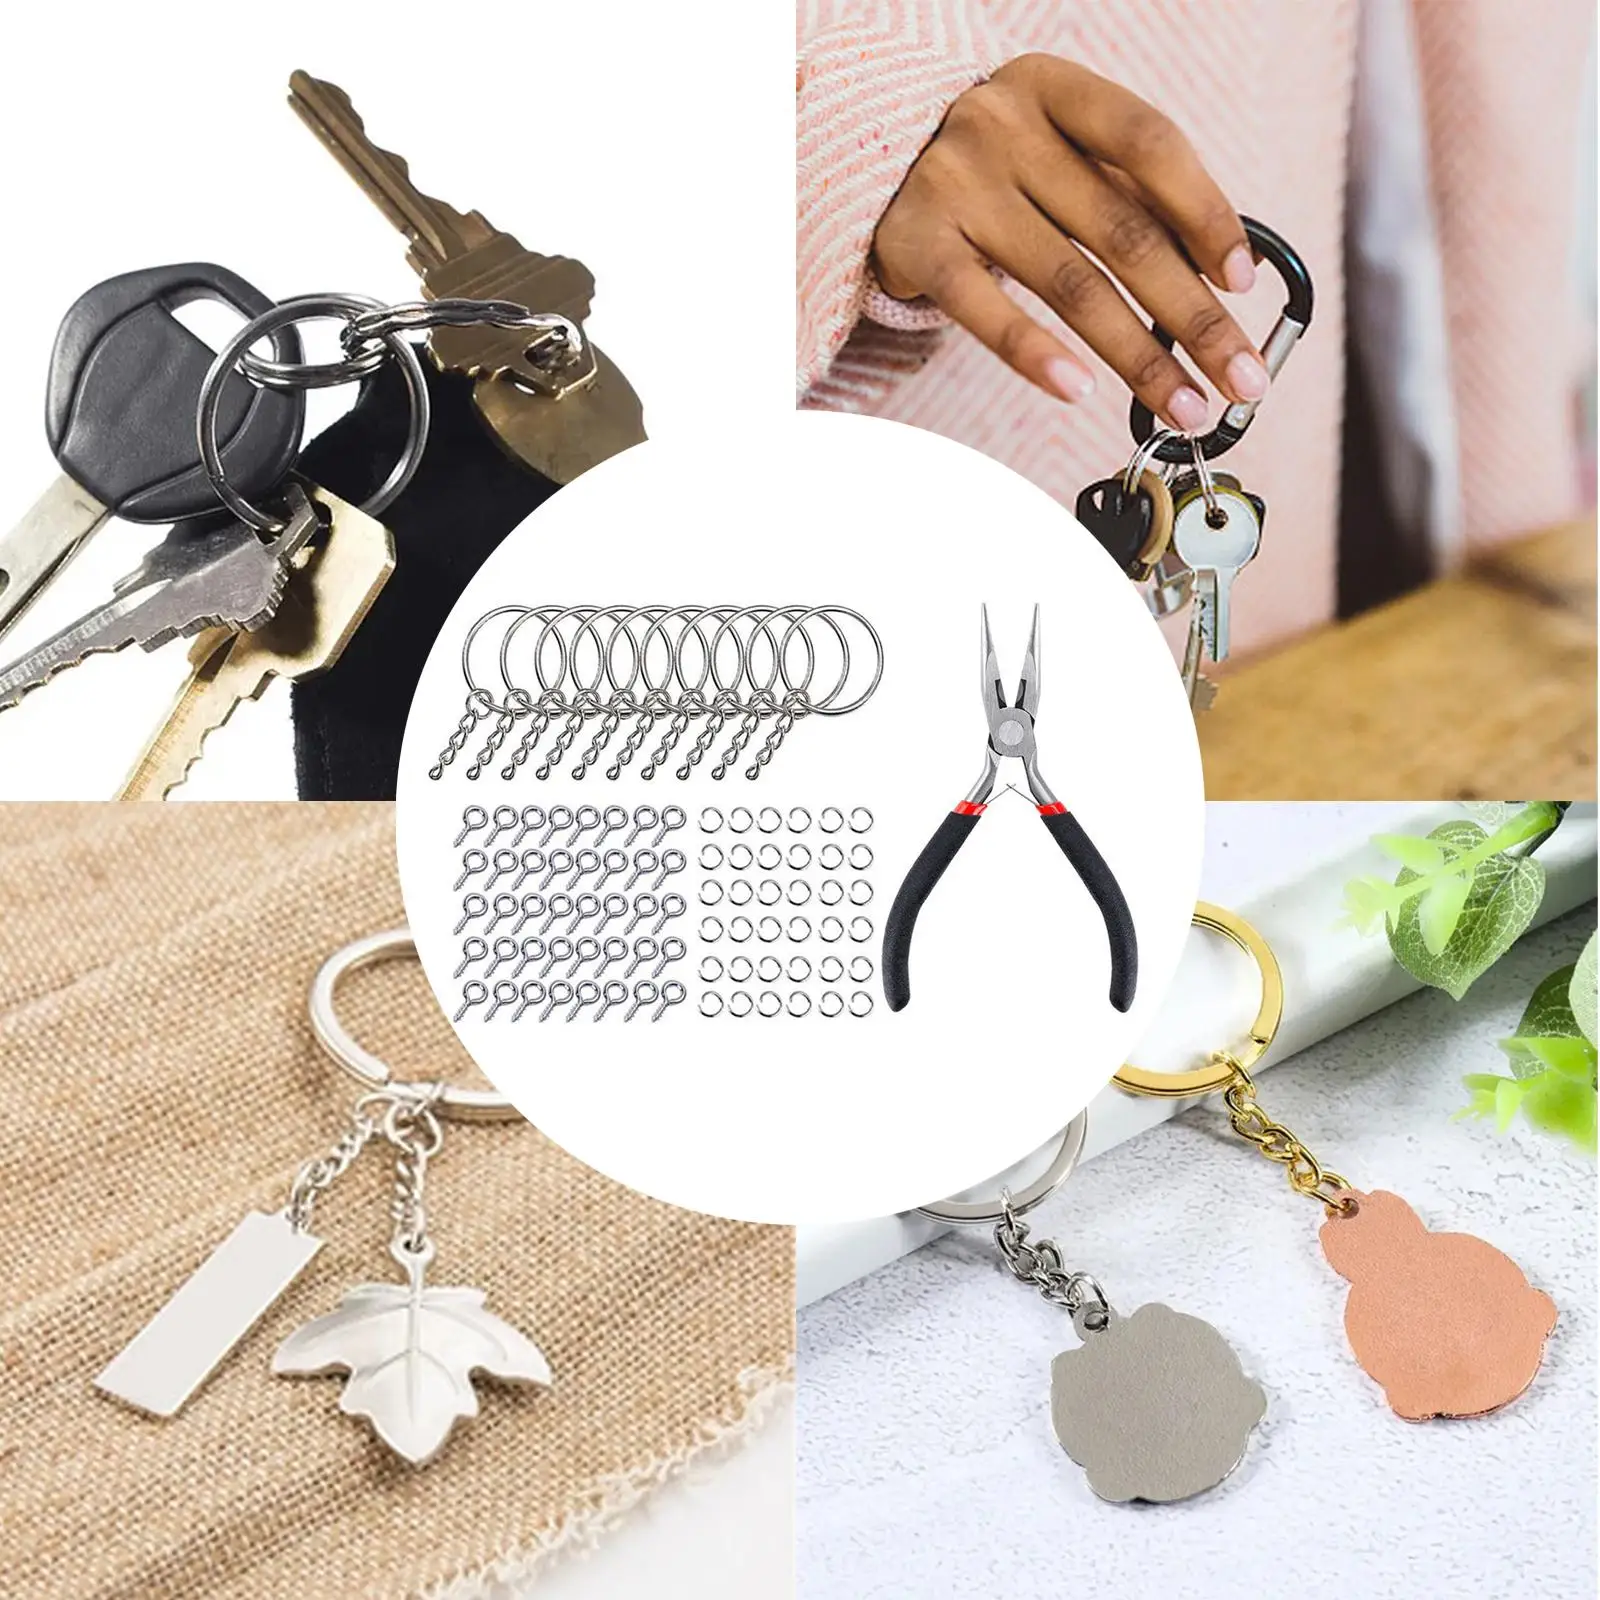 221x Split Key Rings with Chain Set Connector for DIY Art Crafts Charms Accessories